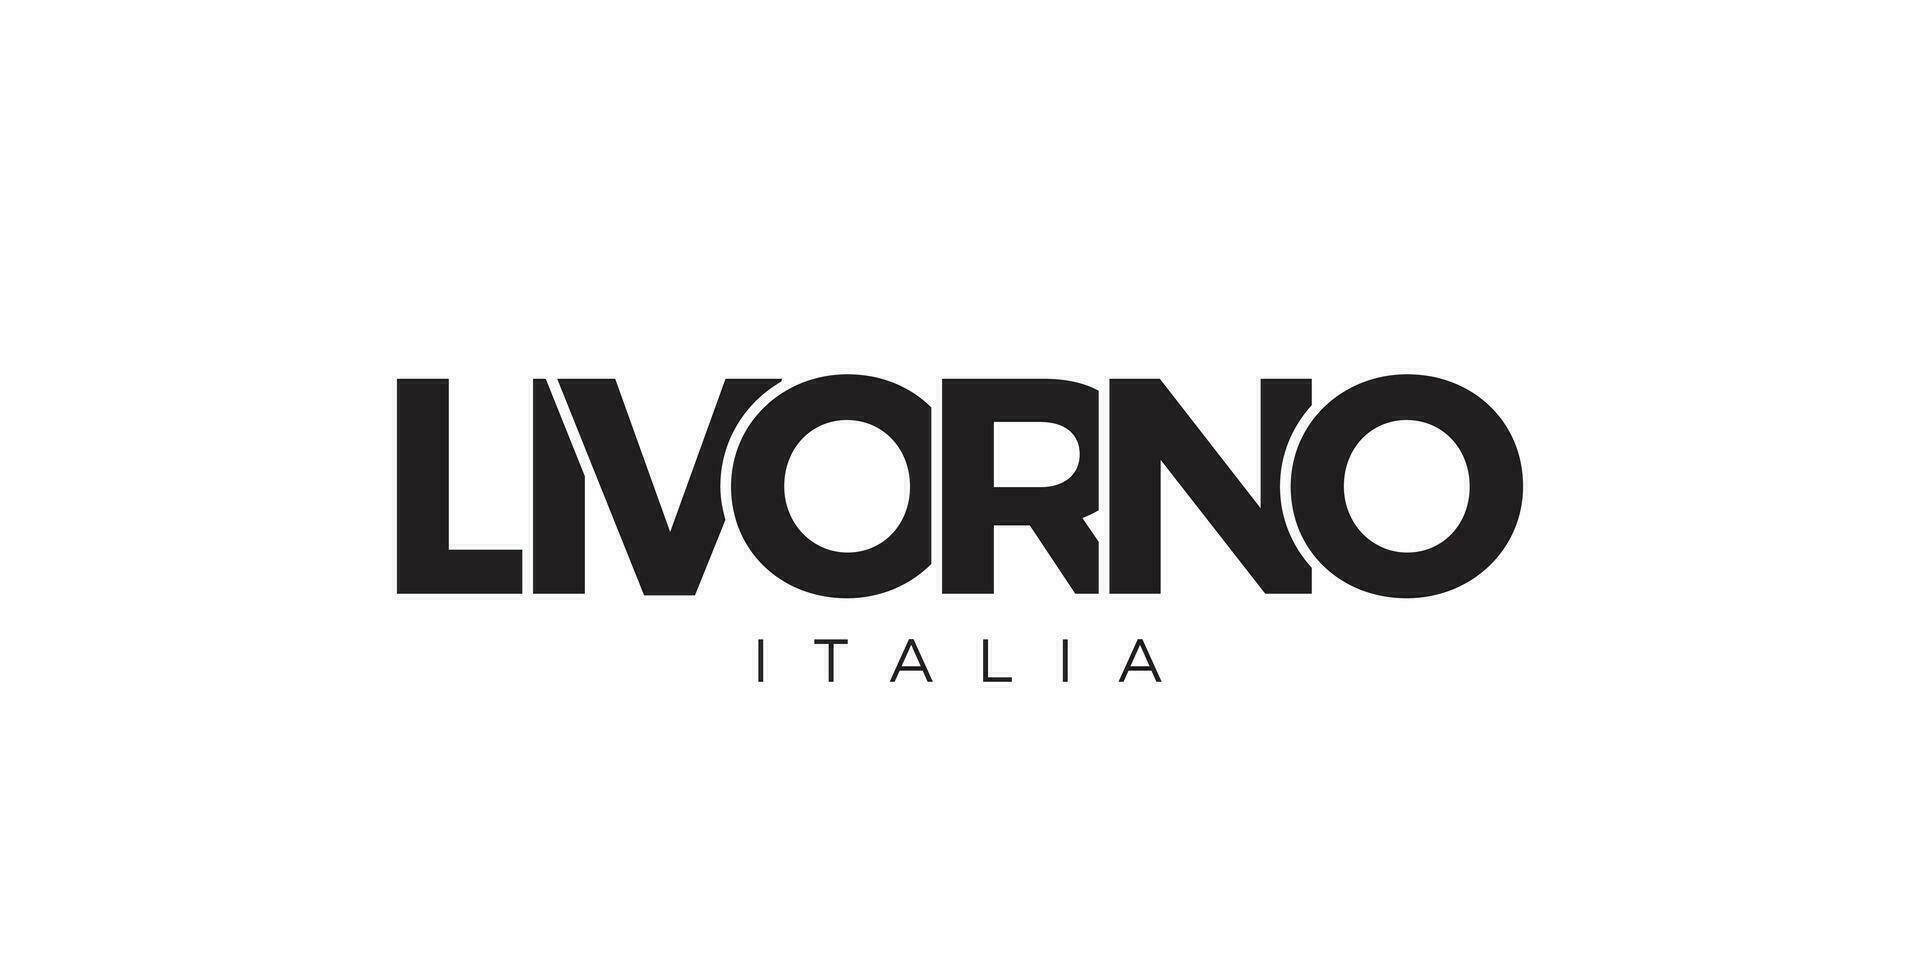 Livorno in the Italia emblem. The design features a geometric style, vector illustration with bold typography in a modern font. The graphic slogan lettering.